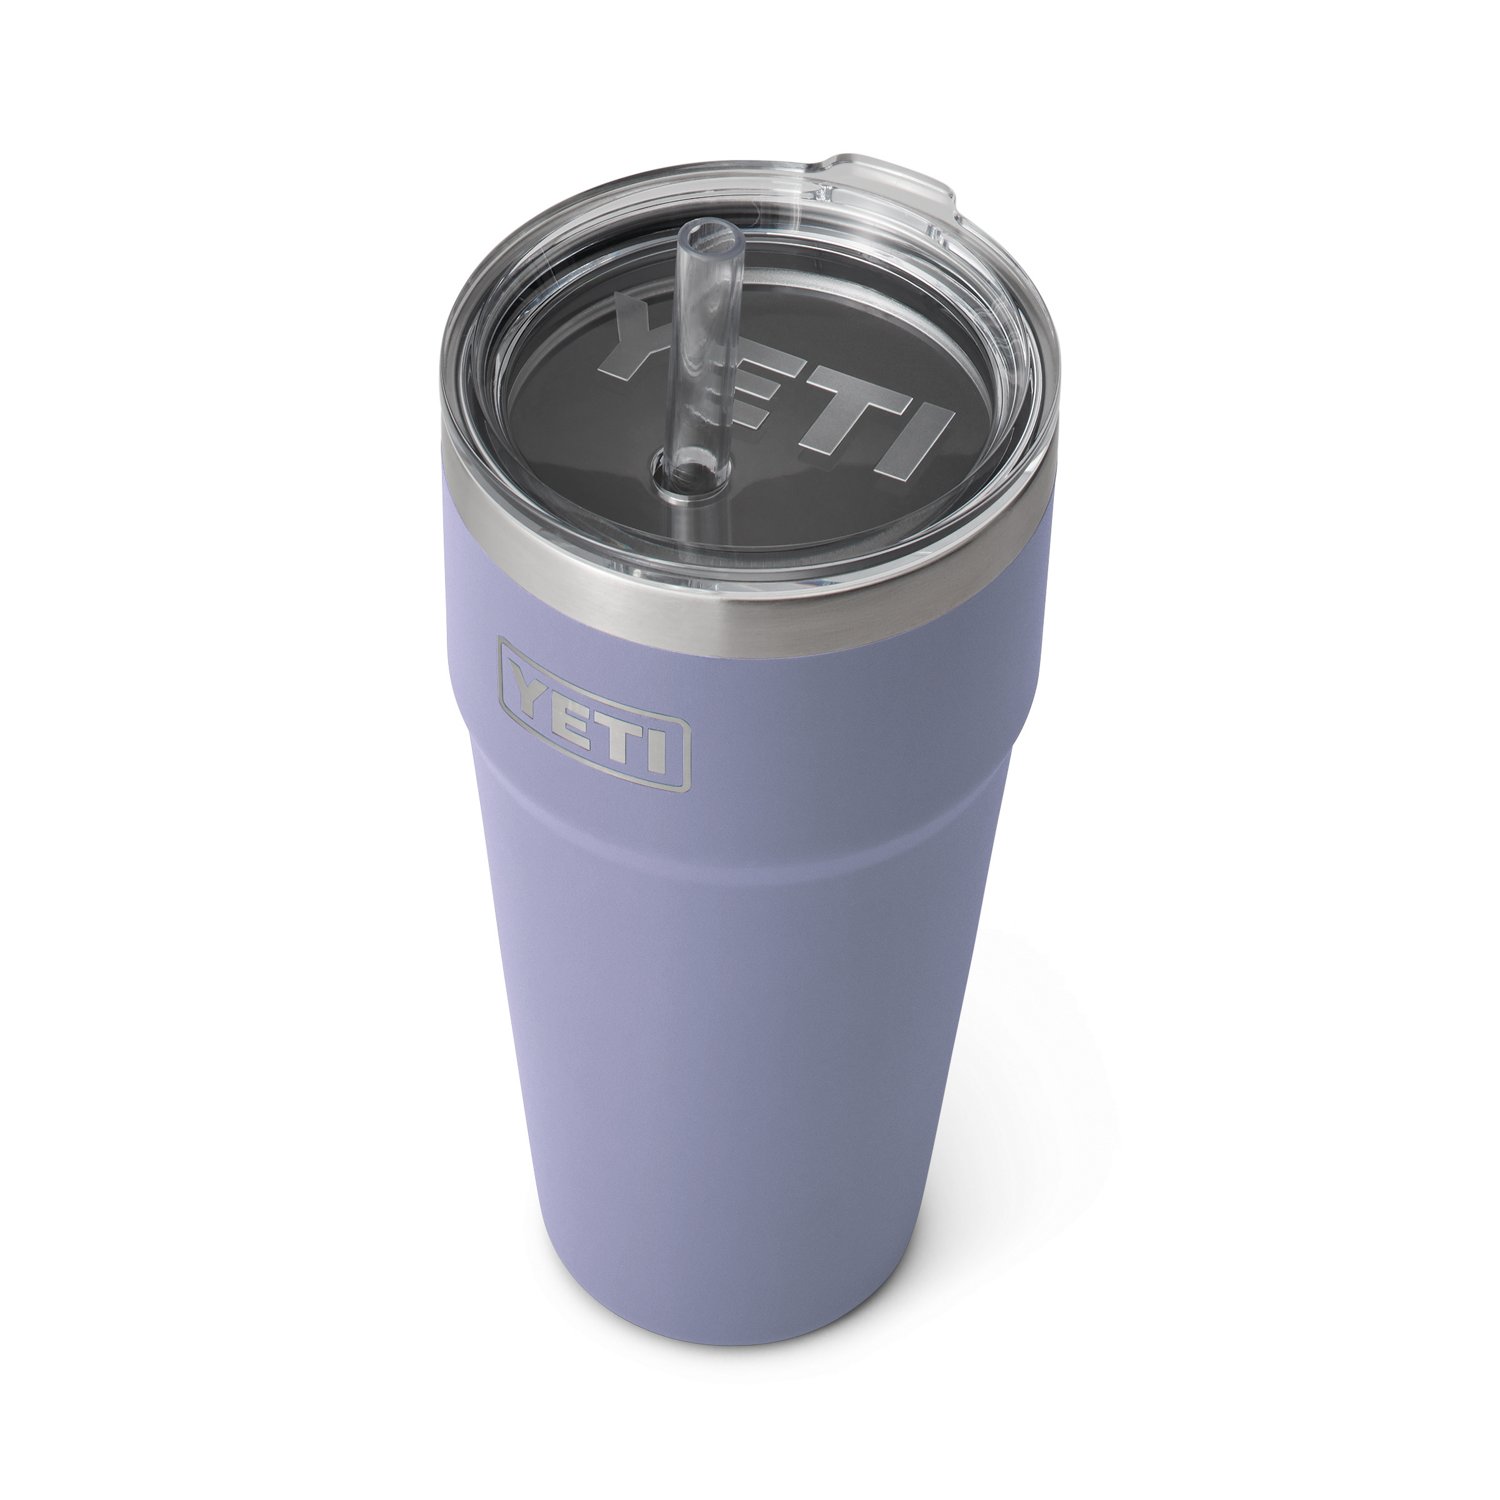 https://academy.scene7.com/is/image/academy//drinkware/yeti-rambler-26-oz-stackable-cup-with-straw-lid-21071501743-purple/b94ba5294e8d4d3da483d83df56498bb?$pdp-mobile-gallery-ng$